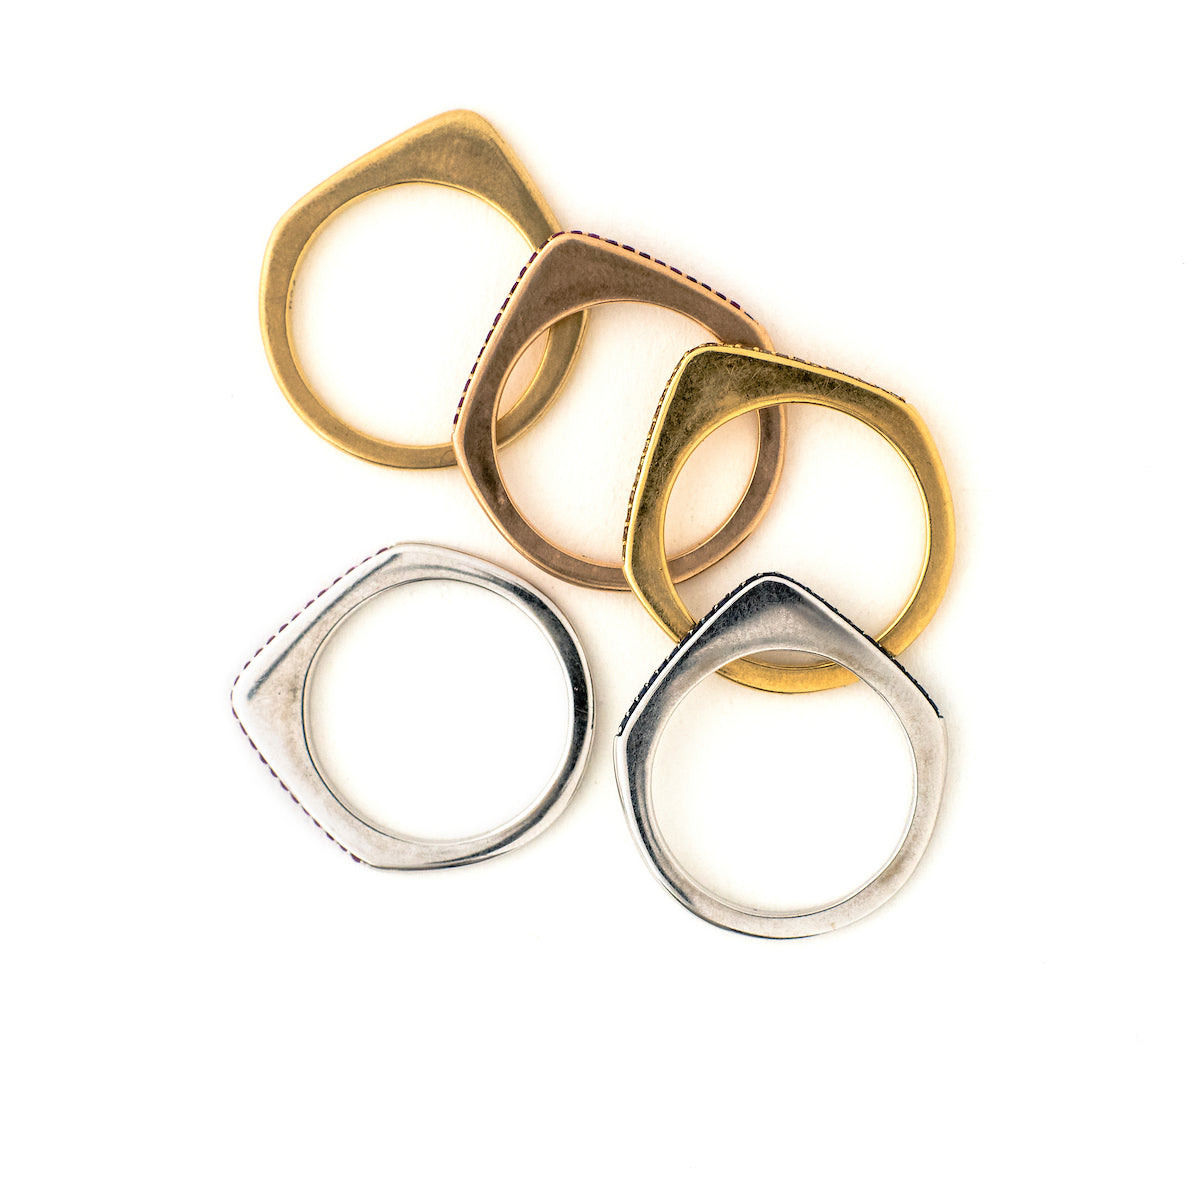 These incredibly unique rings from the 1970s are made of 18K gold and feature a sleek silhouette with a point on the top. They are available either solid gold or encrusted in sapphires. These can be worn on their own, as a set or add one to your existing stack for even more drama. These are a true statement piece! Front ring stack view